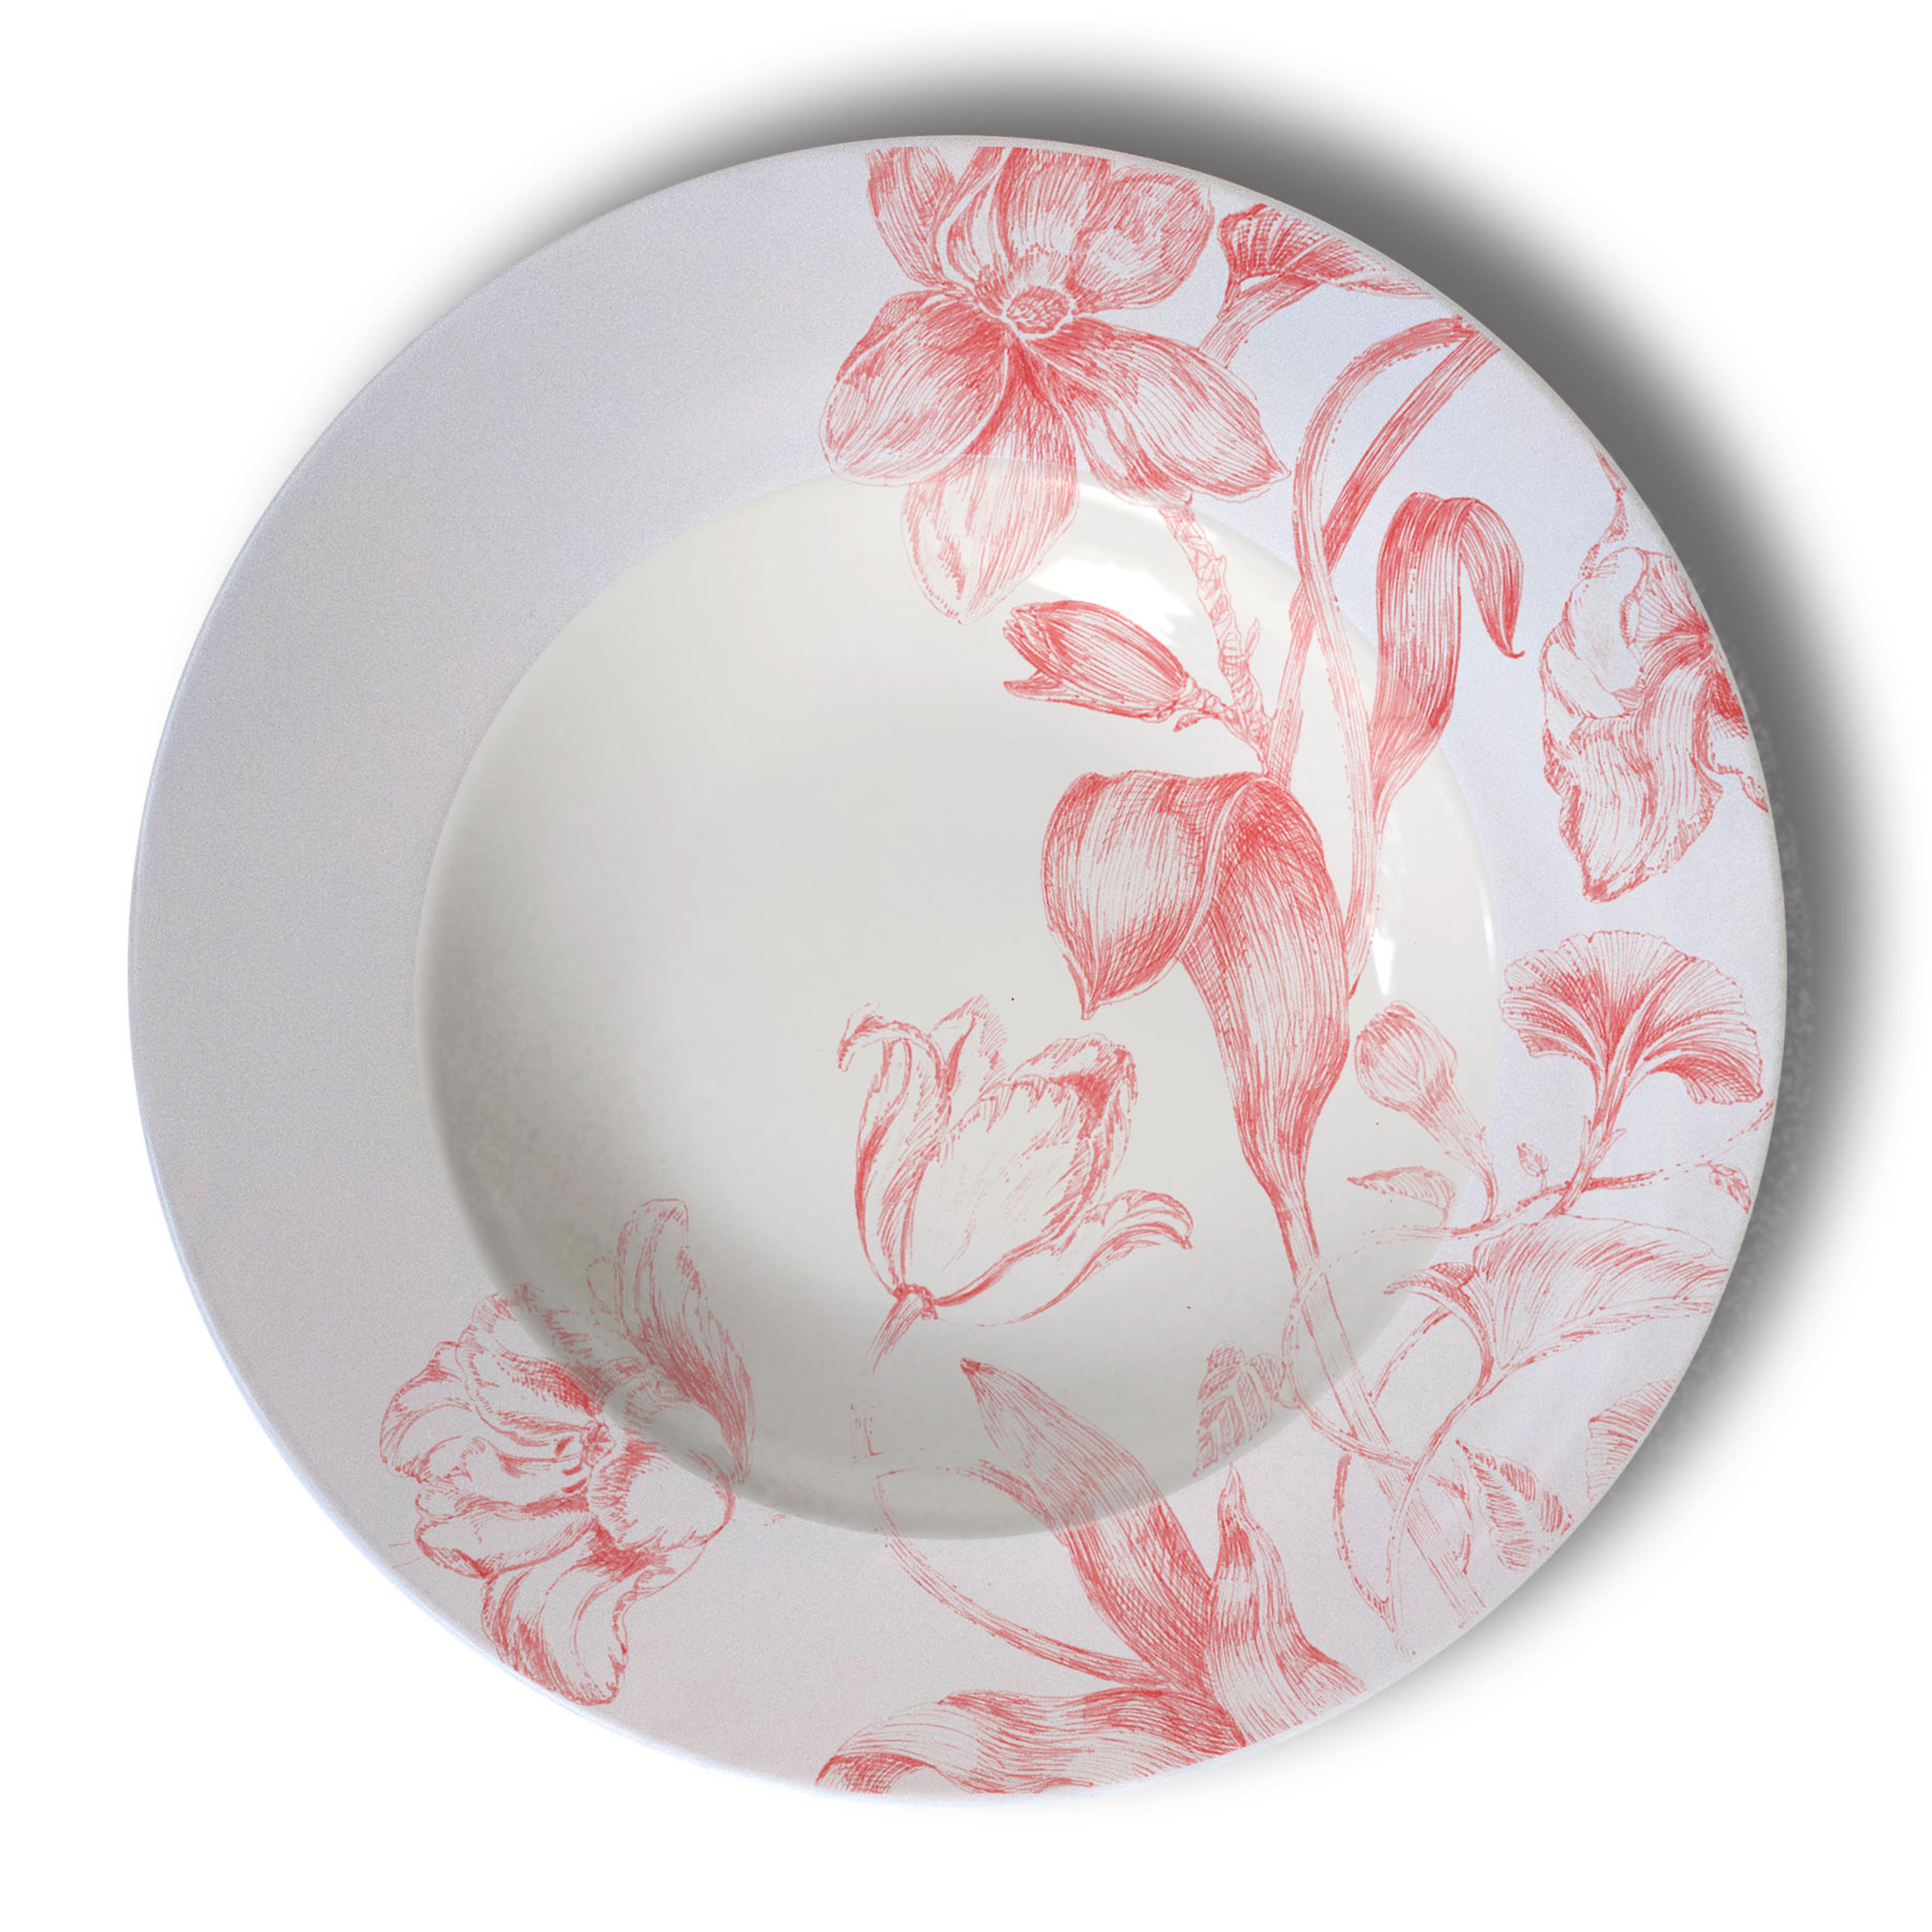 Mix & Match, Six Contemporary Porcelain Pasta Plates with Flowers and Birds For Sale 3